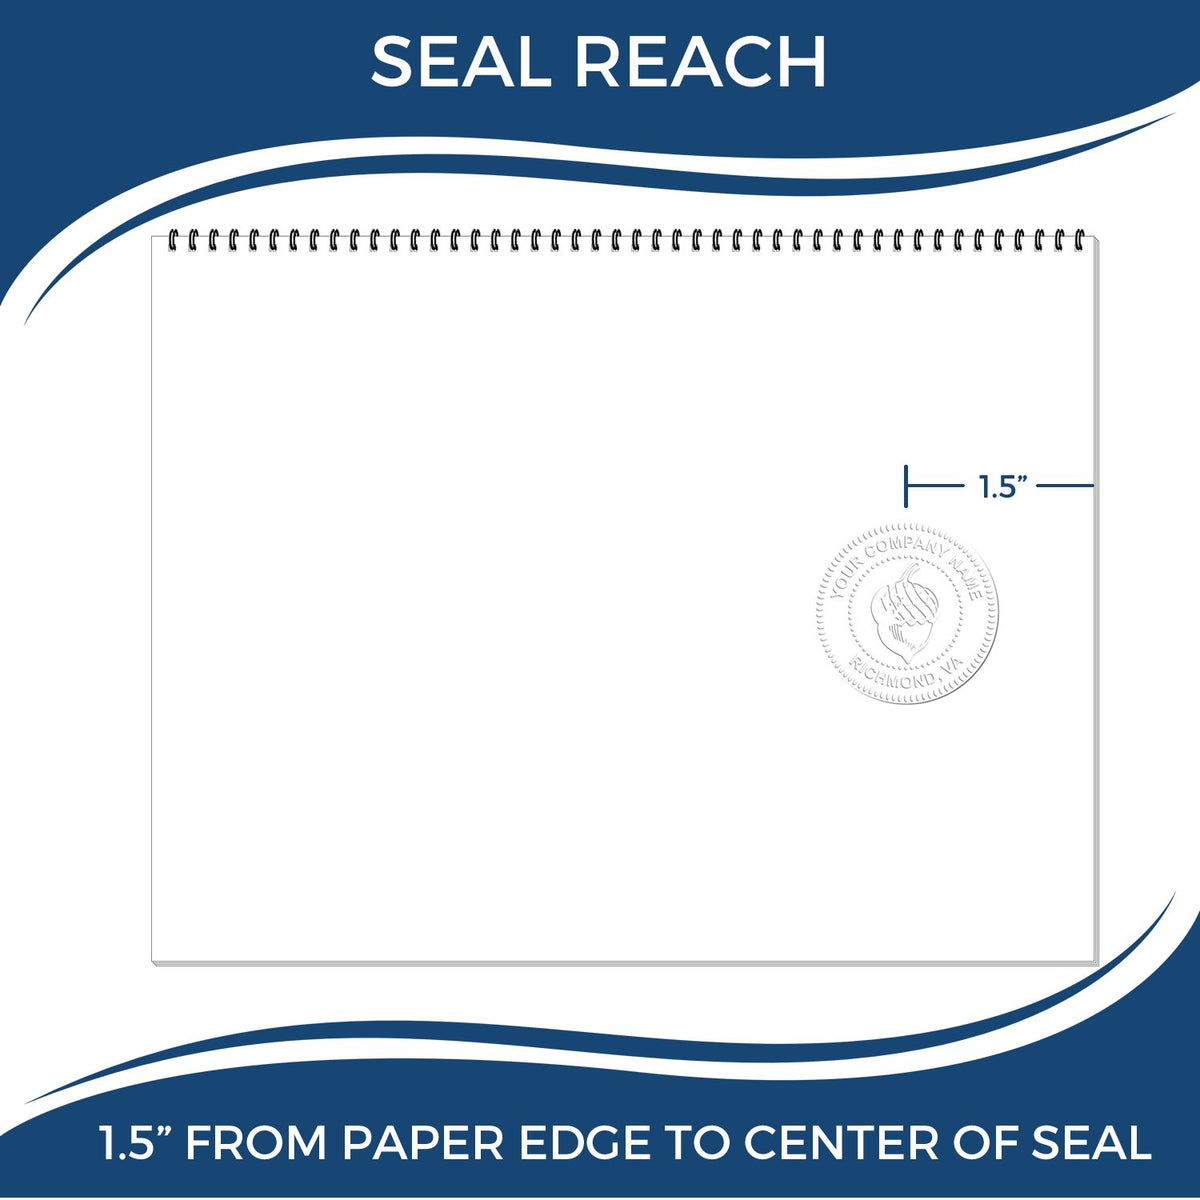 An infographic showing the seal reach which is represented by a ruler and a miniature seal image of the State of Texas Architectural Seal Embosser